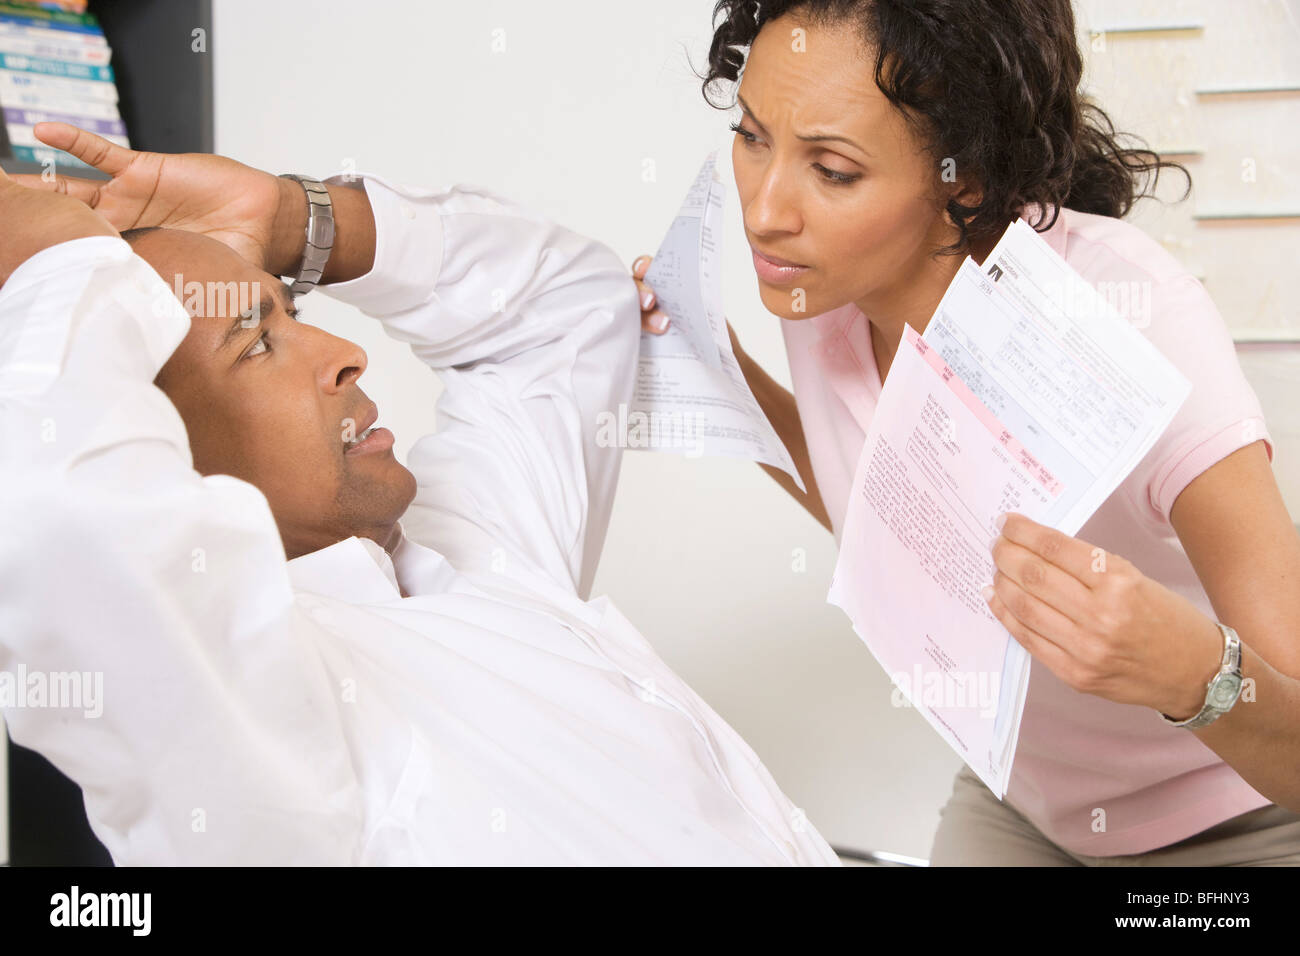 Woman Confronting Man About Bills Stock Photo